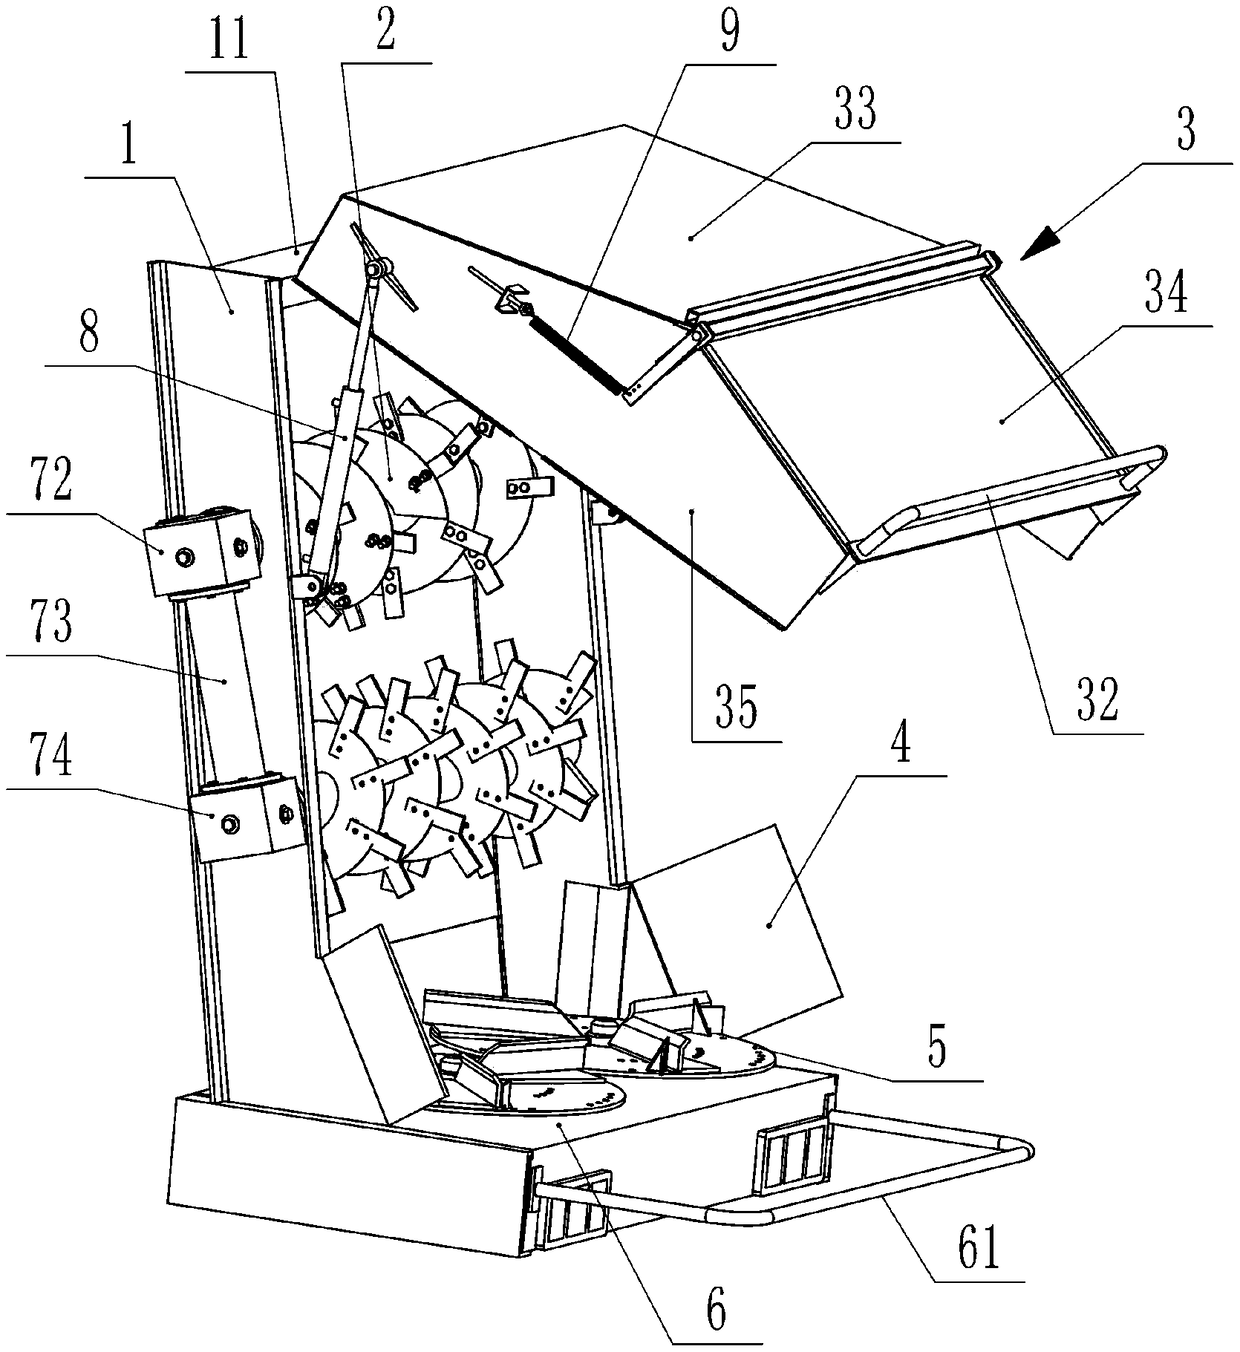 Fertilizer crushing and scattering device